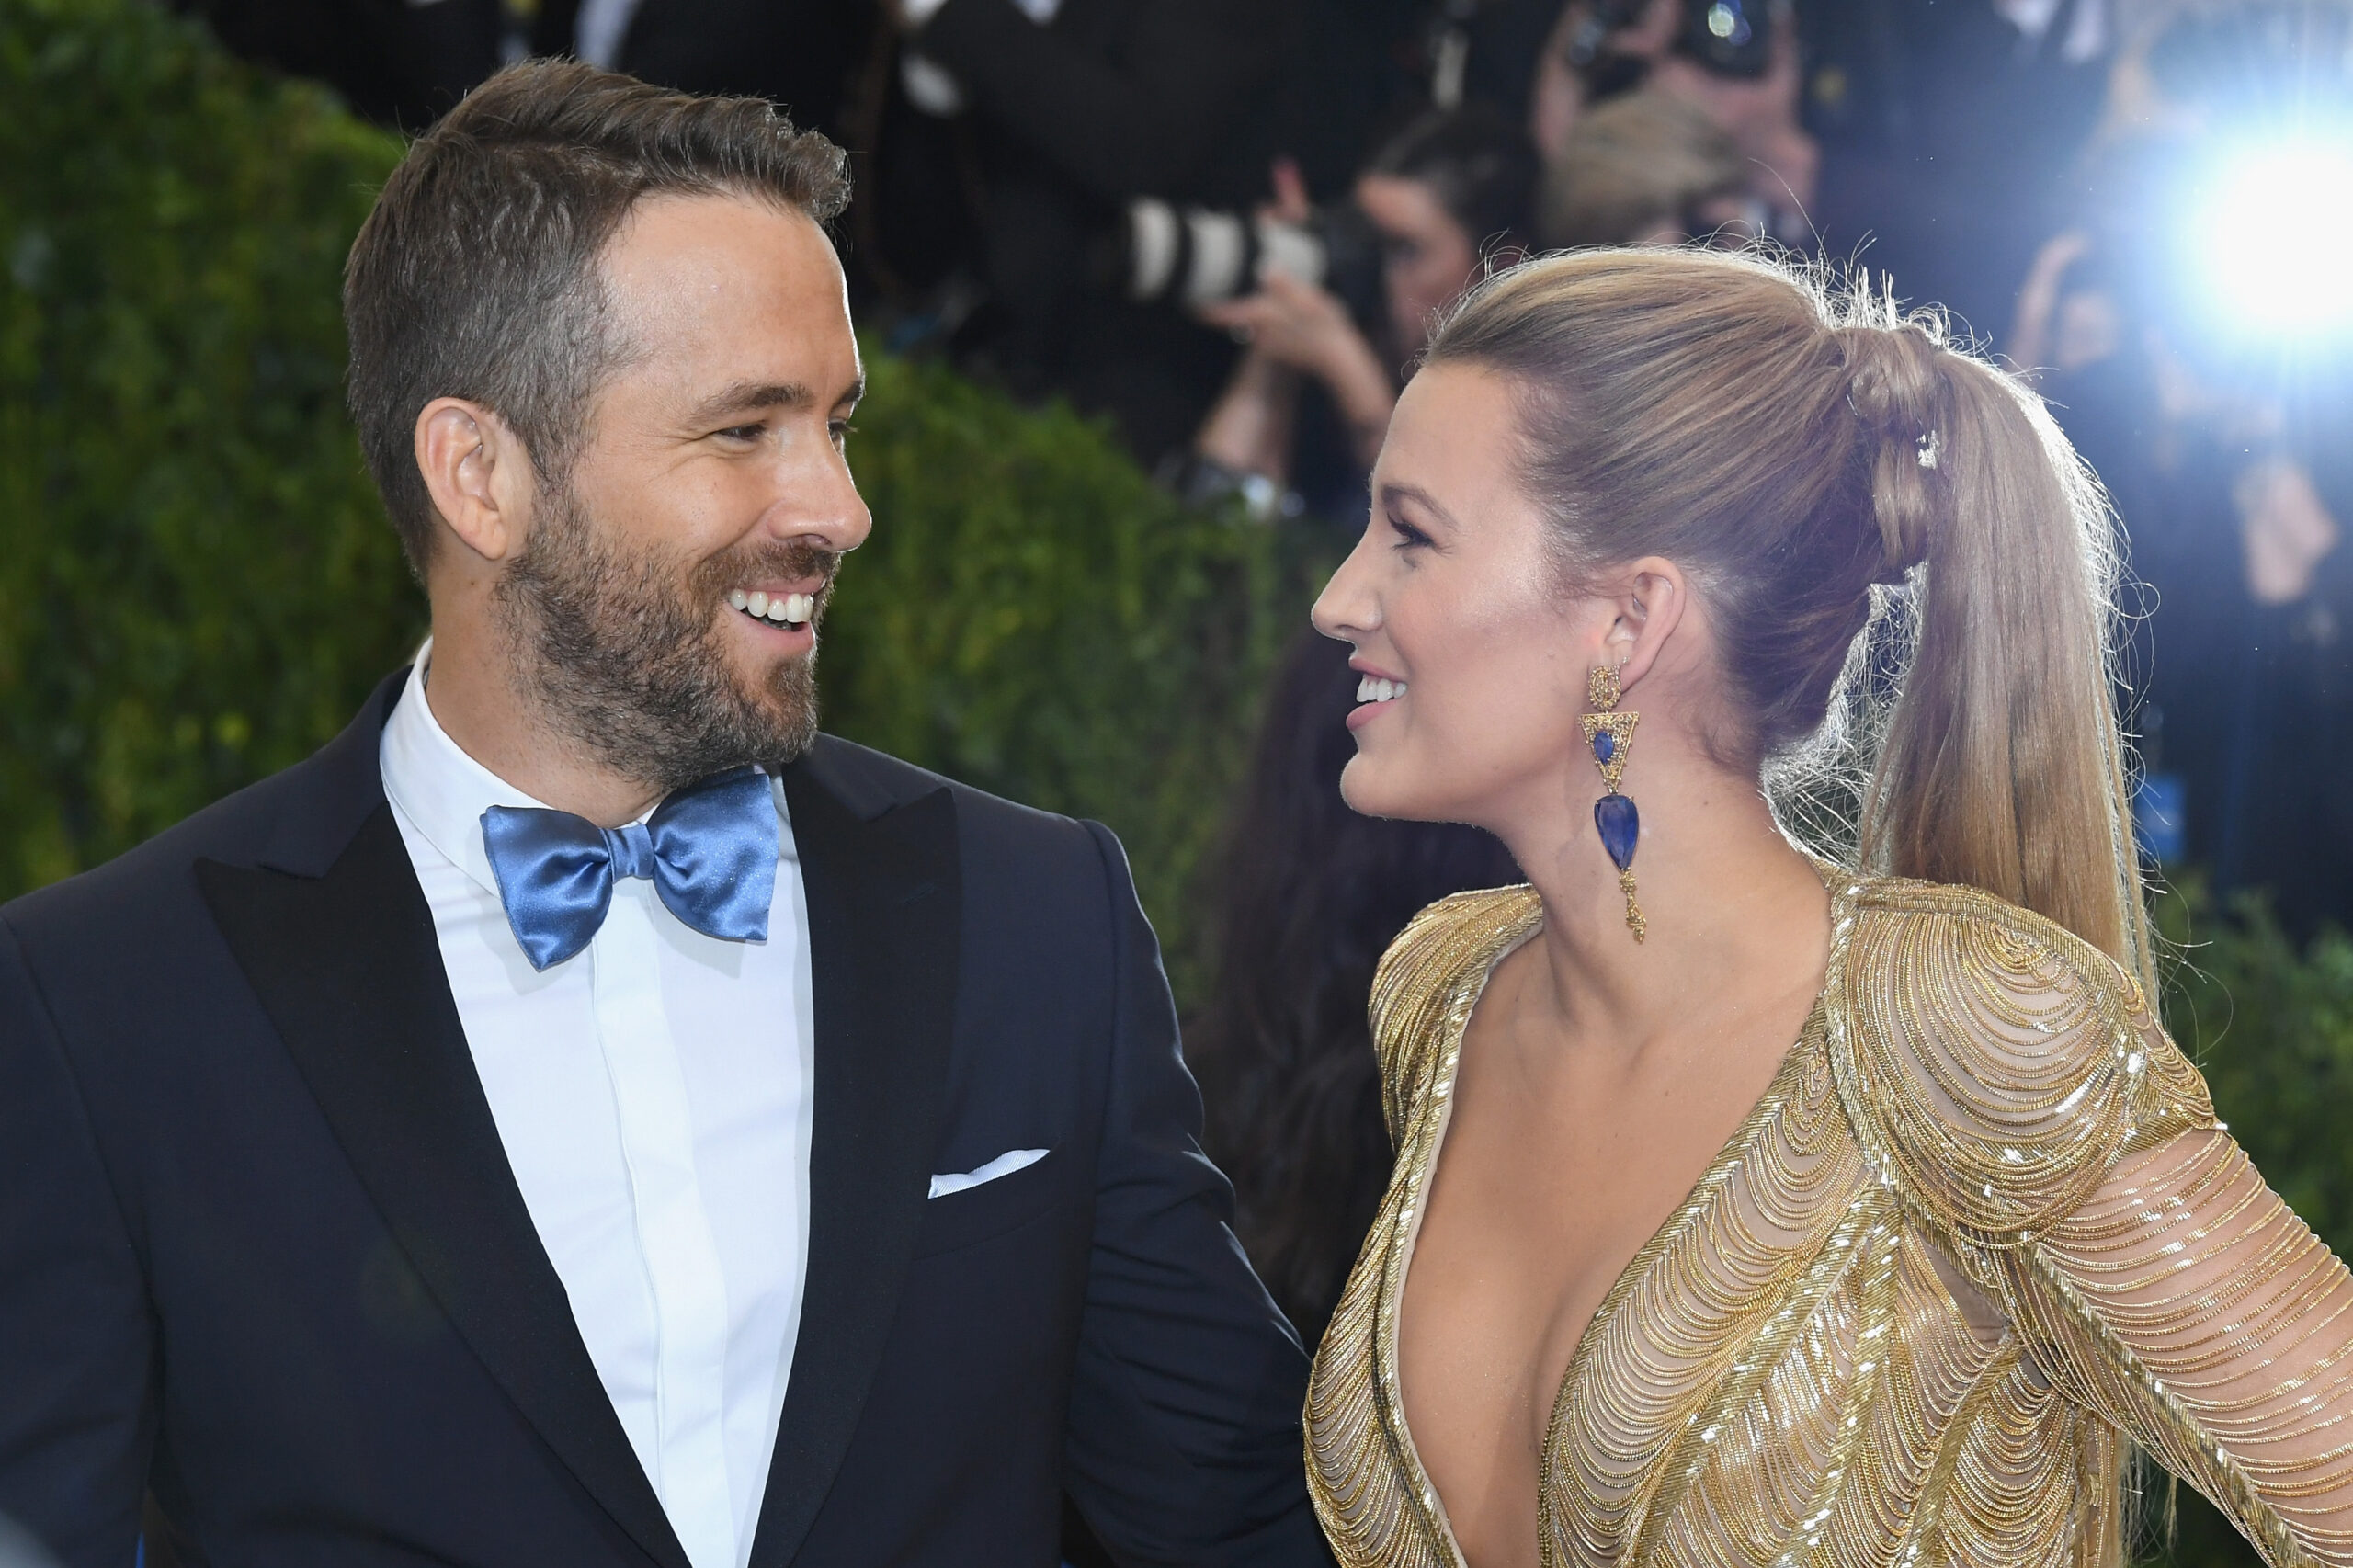 Ryan Reynolds’ touching tribute to wife Blake Lively